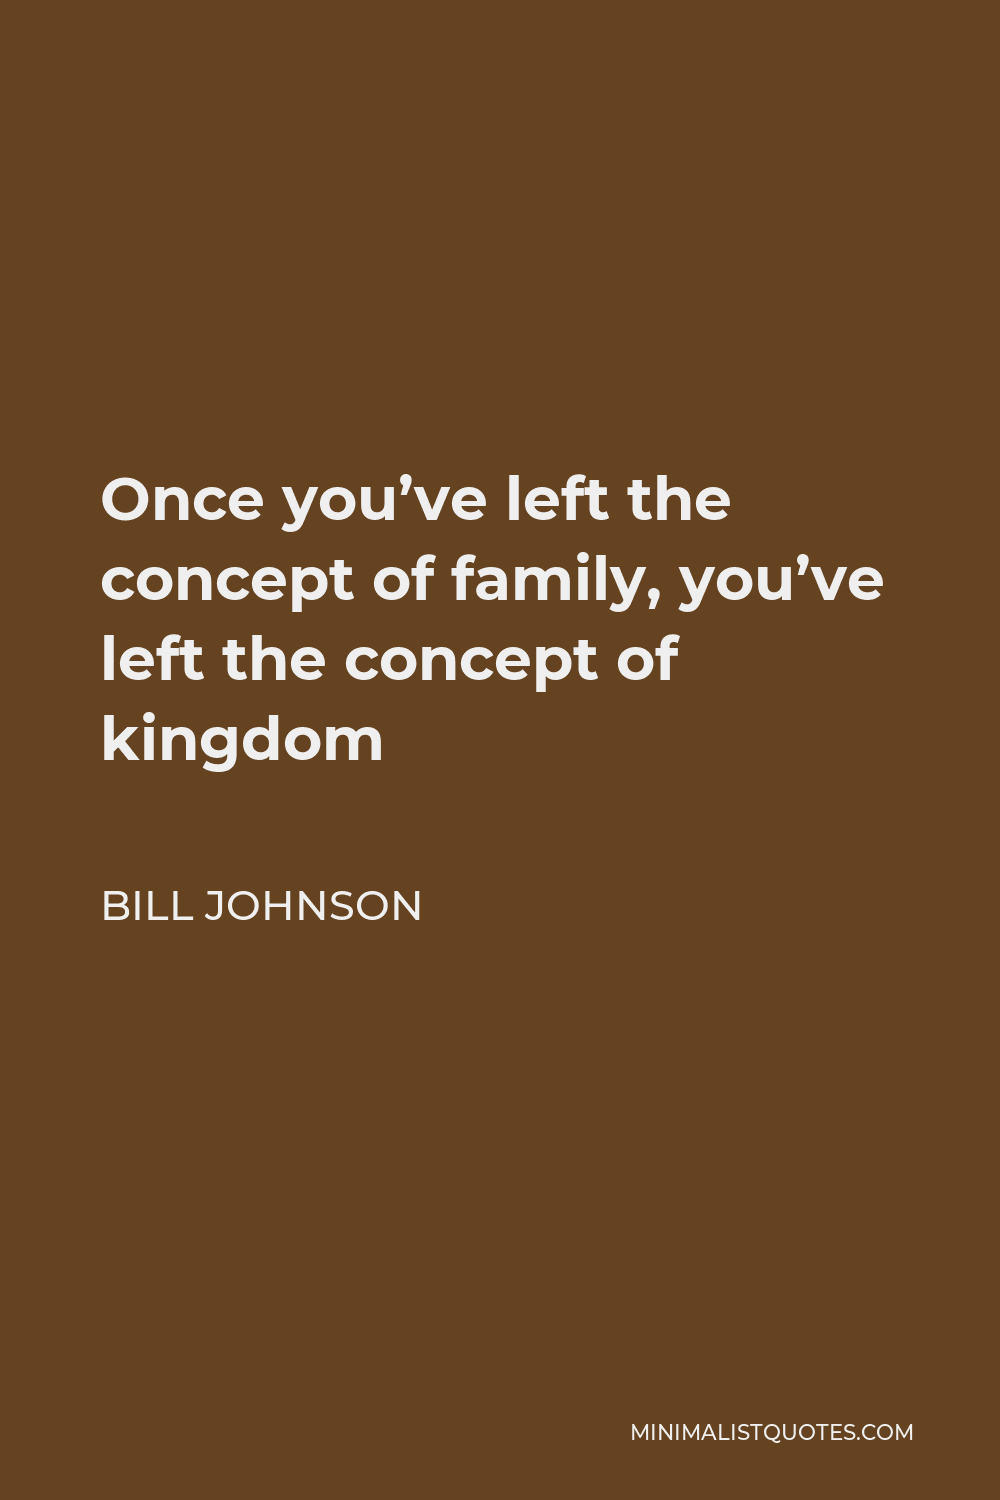 Bill Johnson Quote - Once you’ve left the concept of family, you’ve left the concept of kingdom